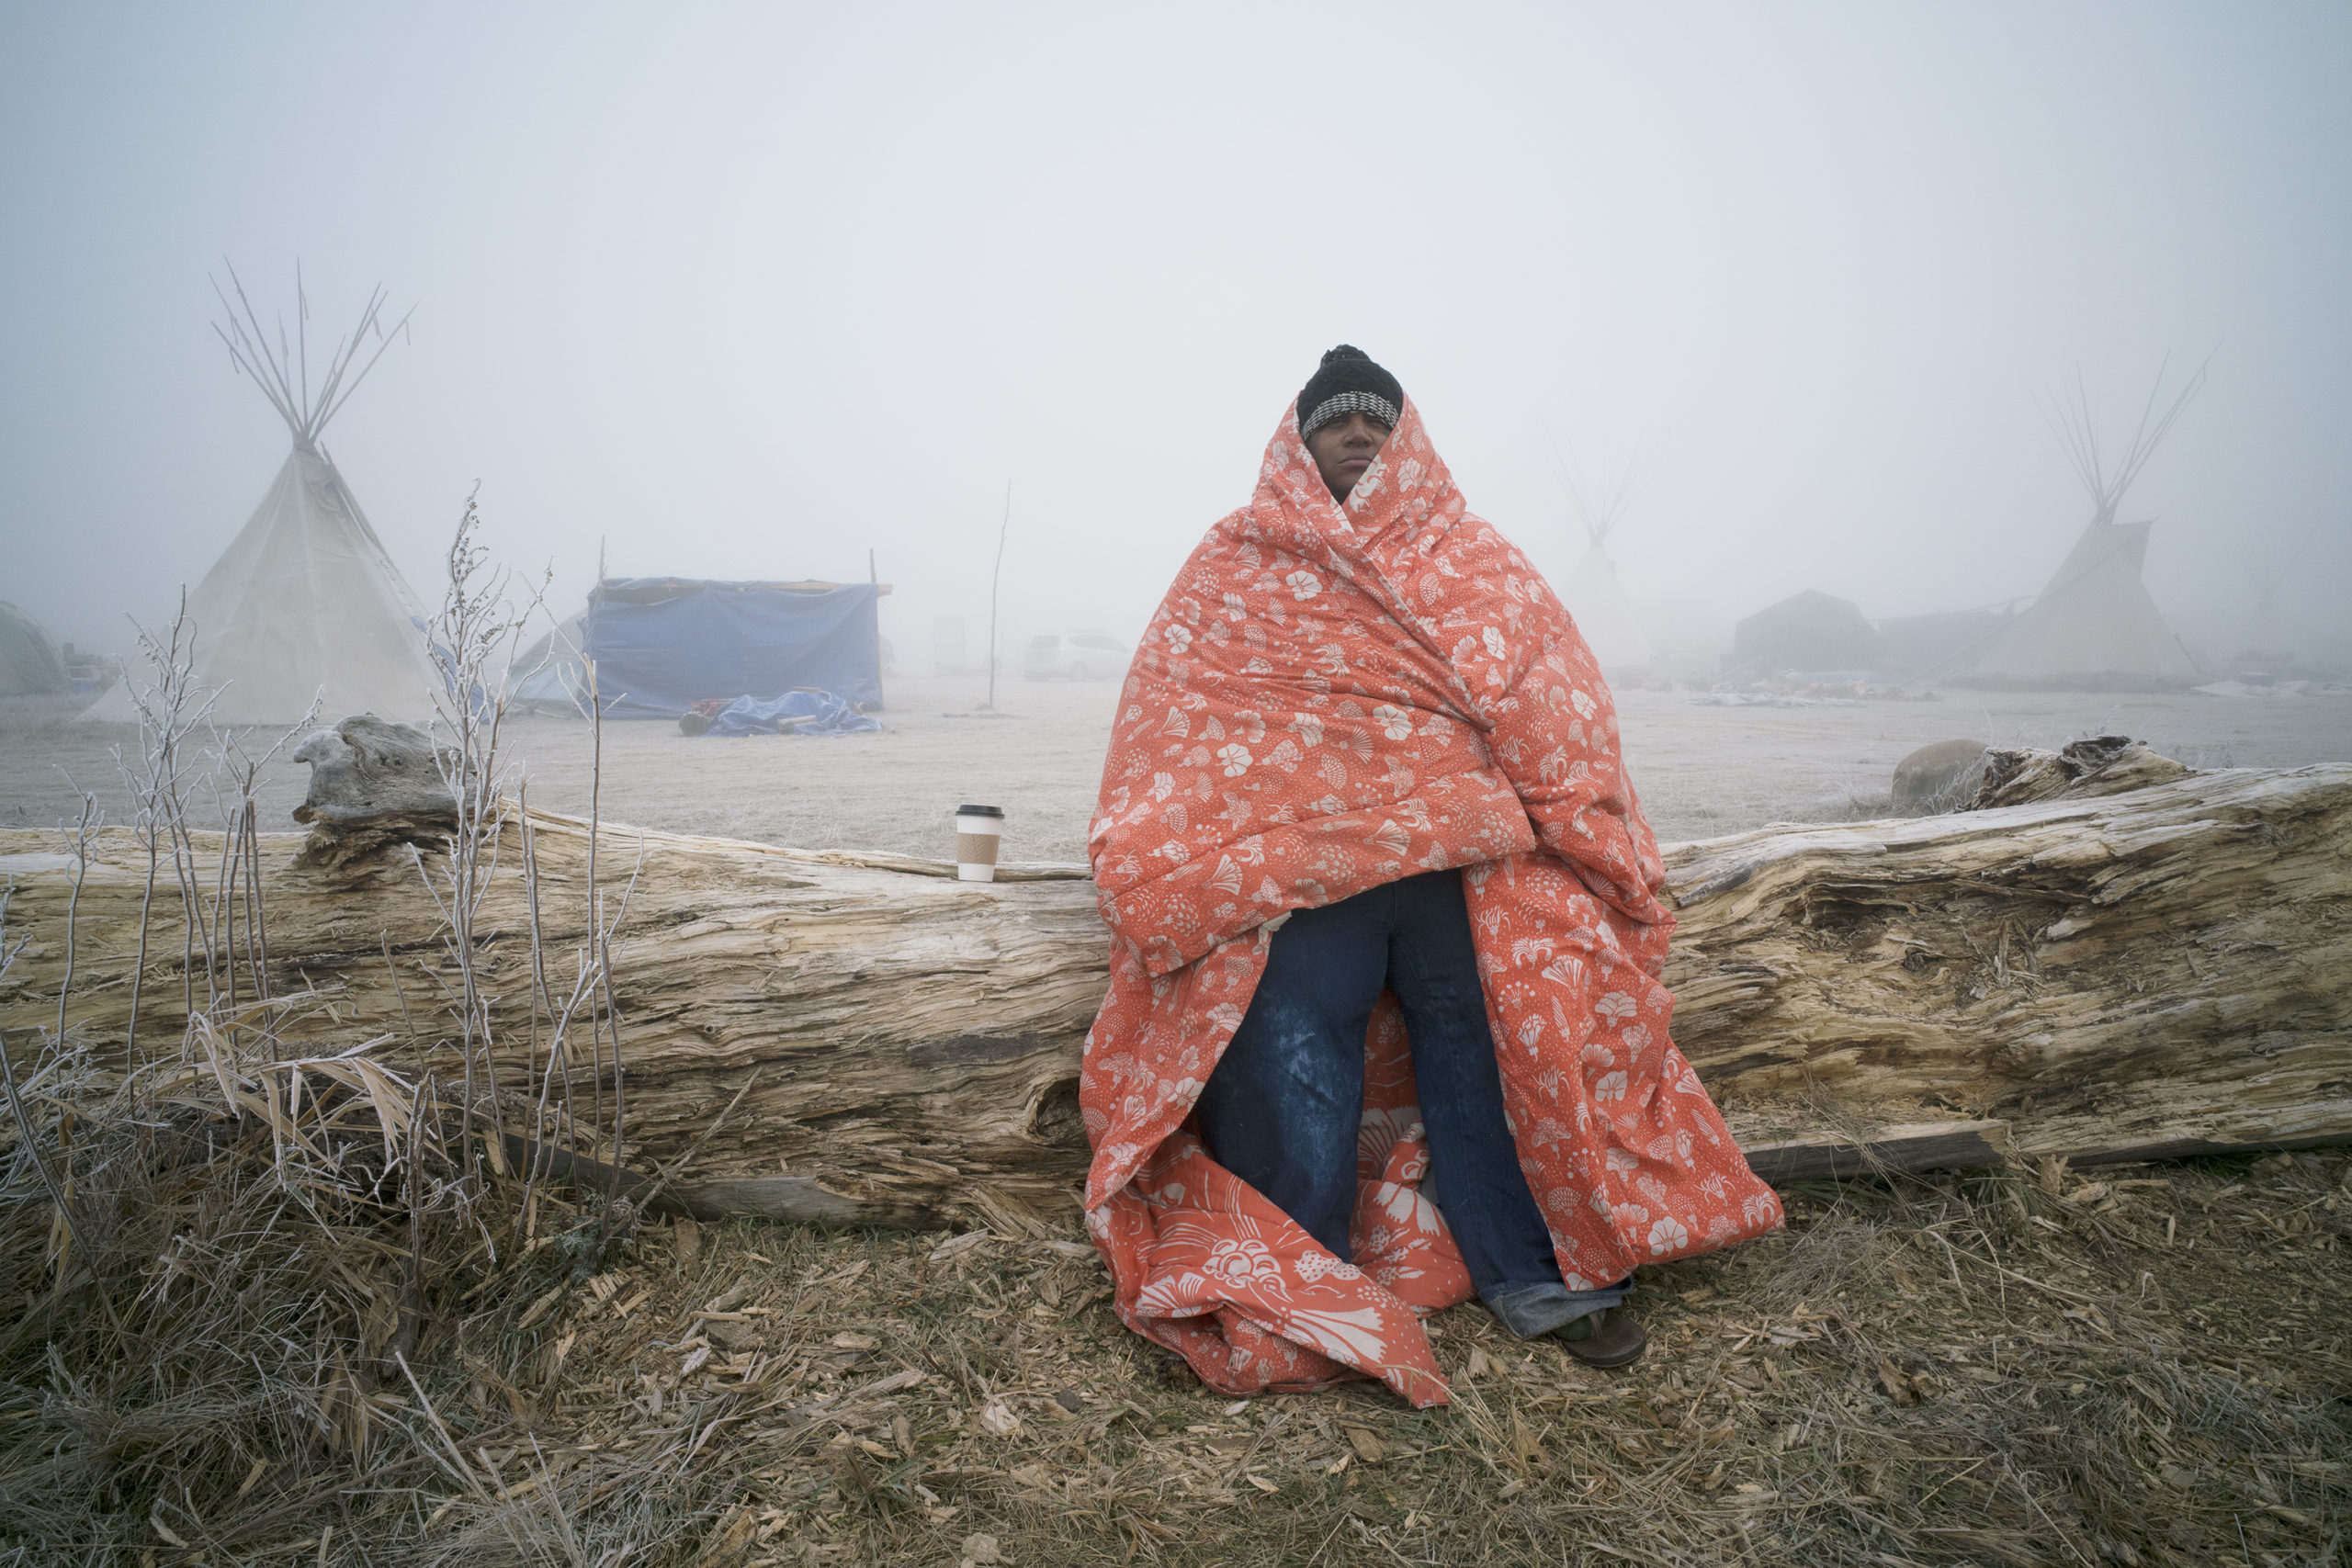 Man in blanket with teepee in background